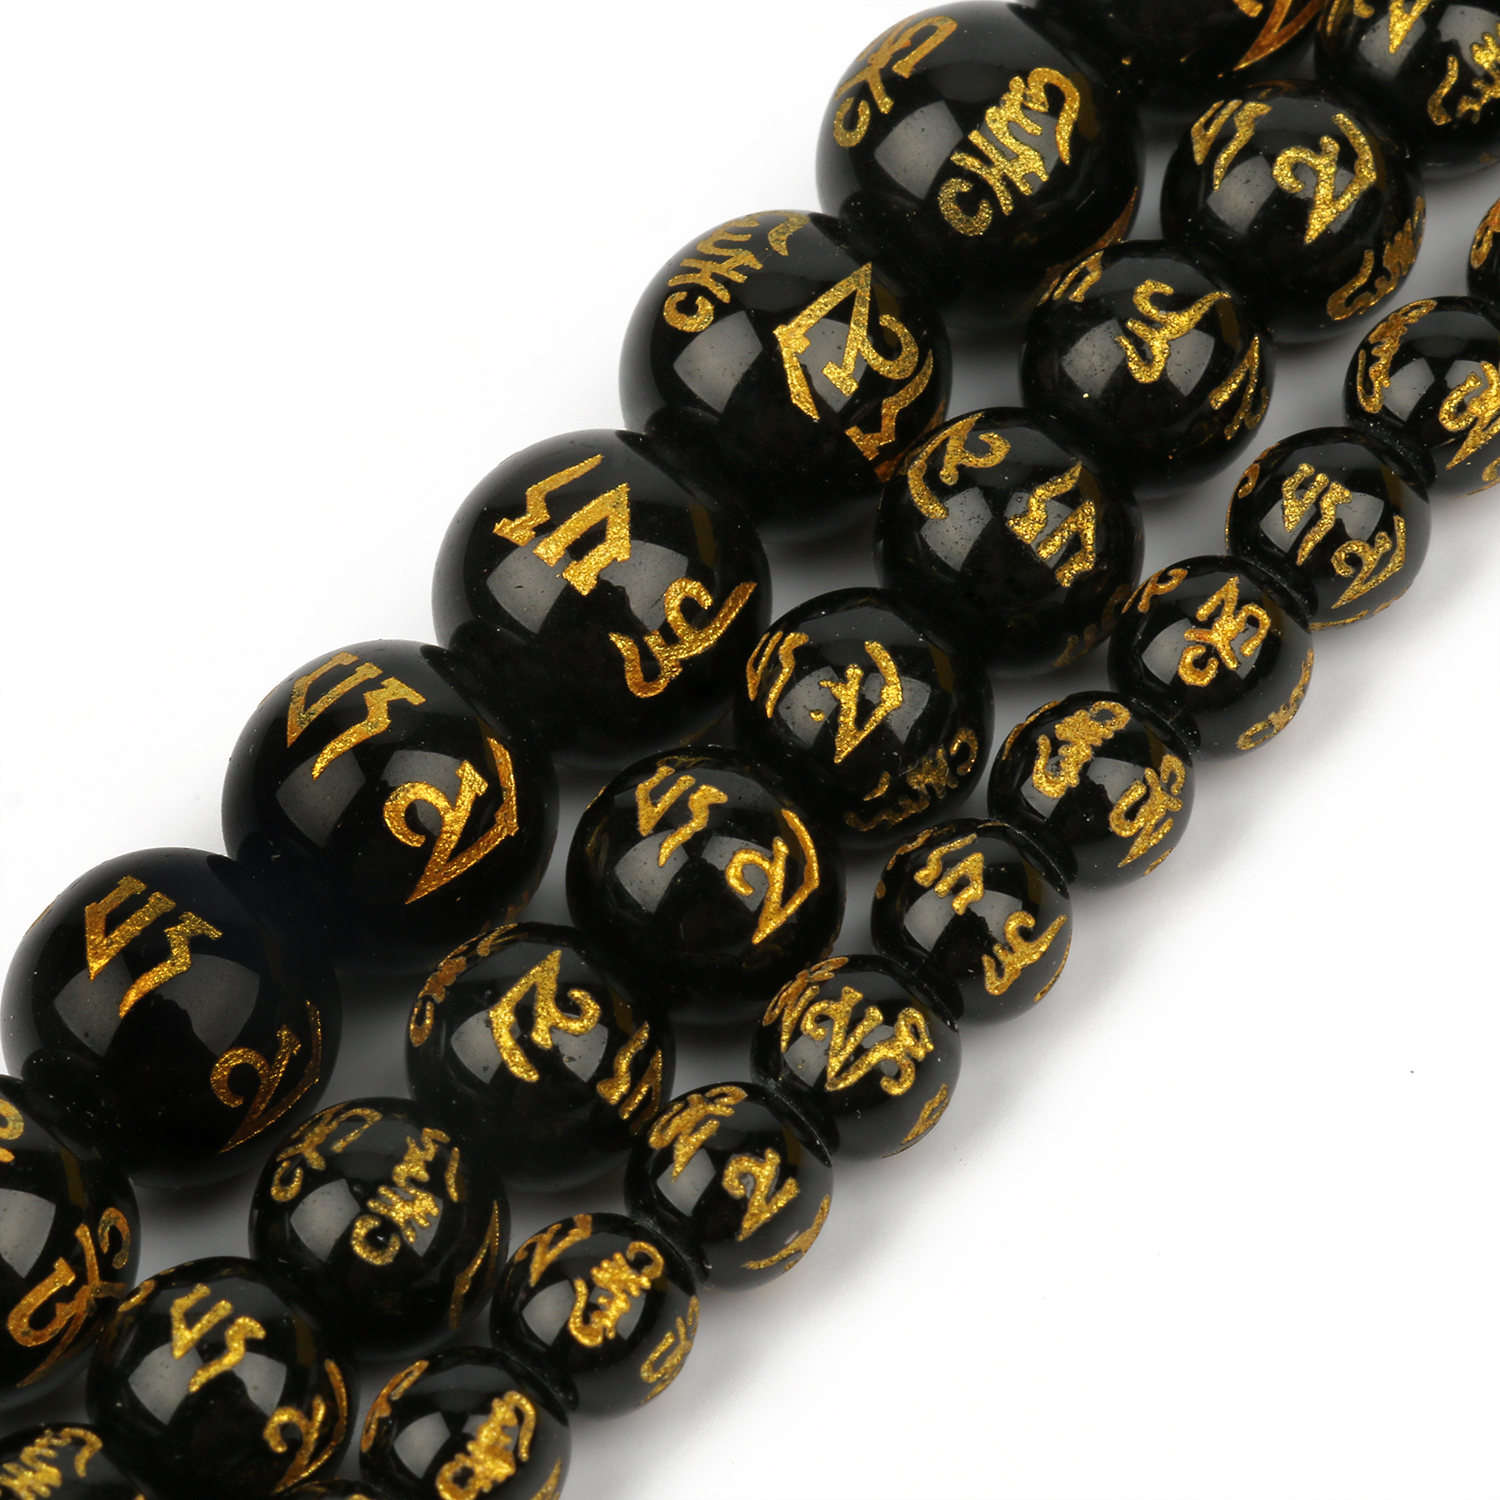 8/10mm Six Word Mantra Prayer Feng Shui Beads Black Obsidian Agate Round Buddha Beads for DIY Bracelets Jewelry Making Accsories